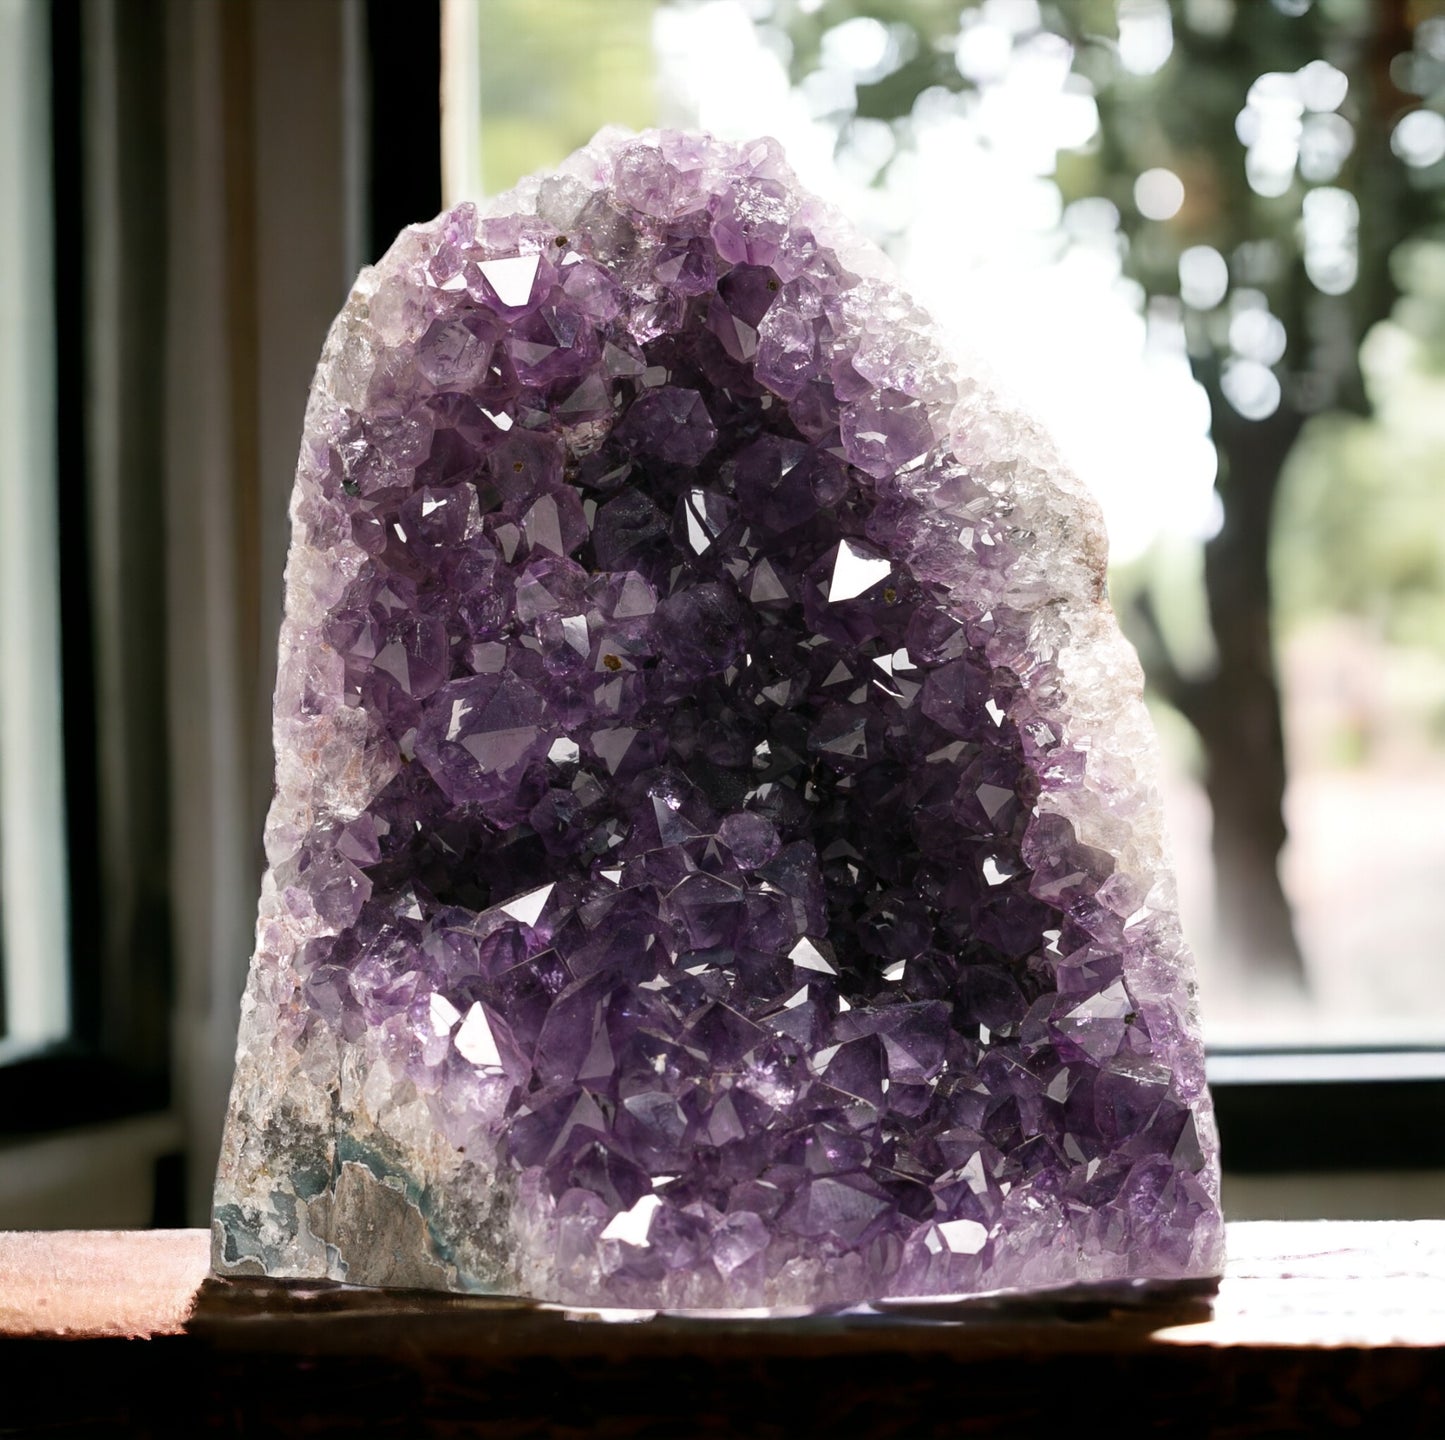 Deep Purple Natural Amethyst Crystal Clusters (1.5 lb to 2 lb) from Uruguay Raw Geode Quartz